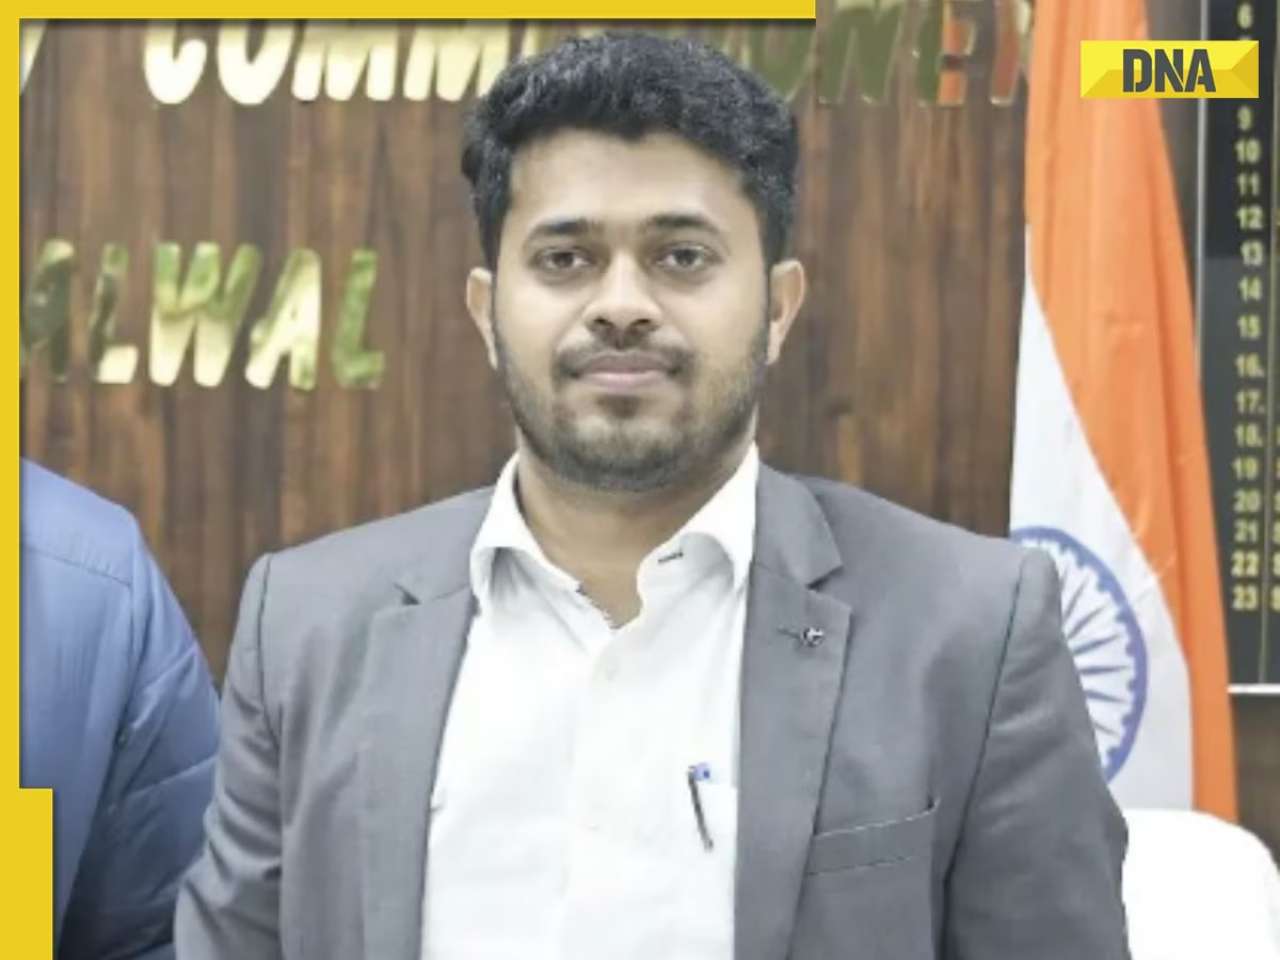 Meet man, IIT graduate who cracked UPSC exam in third attempt to become IAS officer, got AIR...